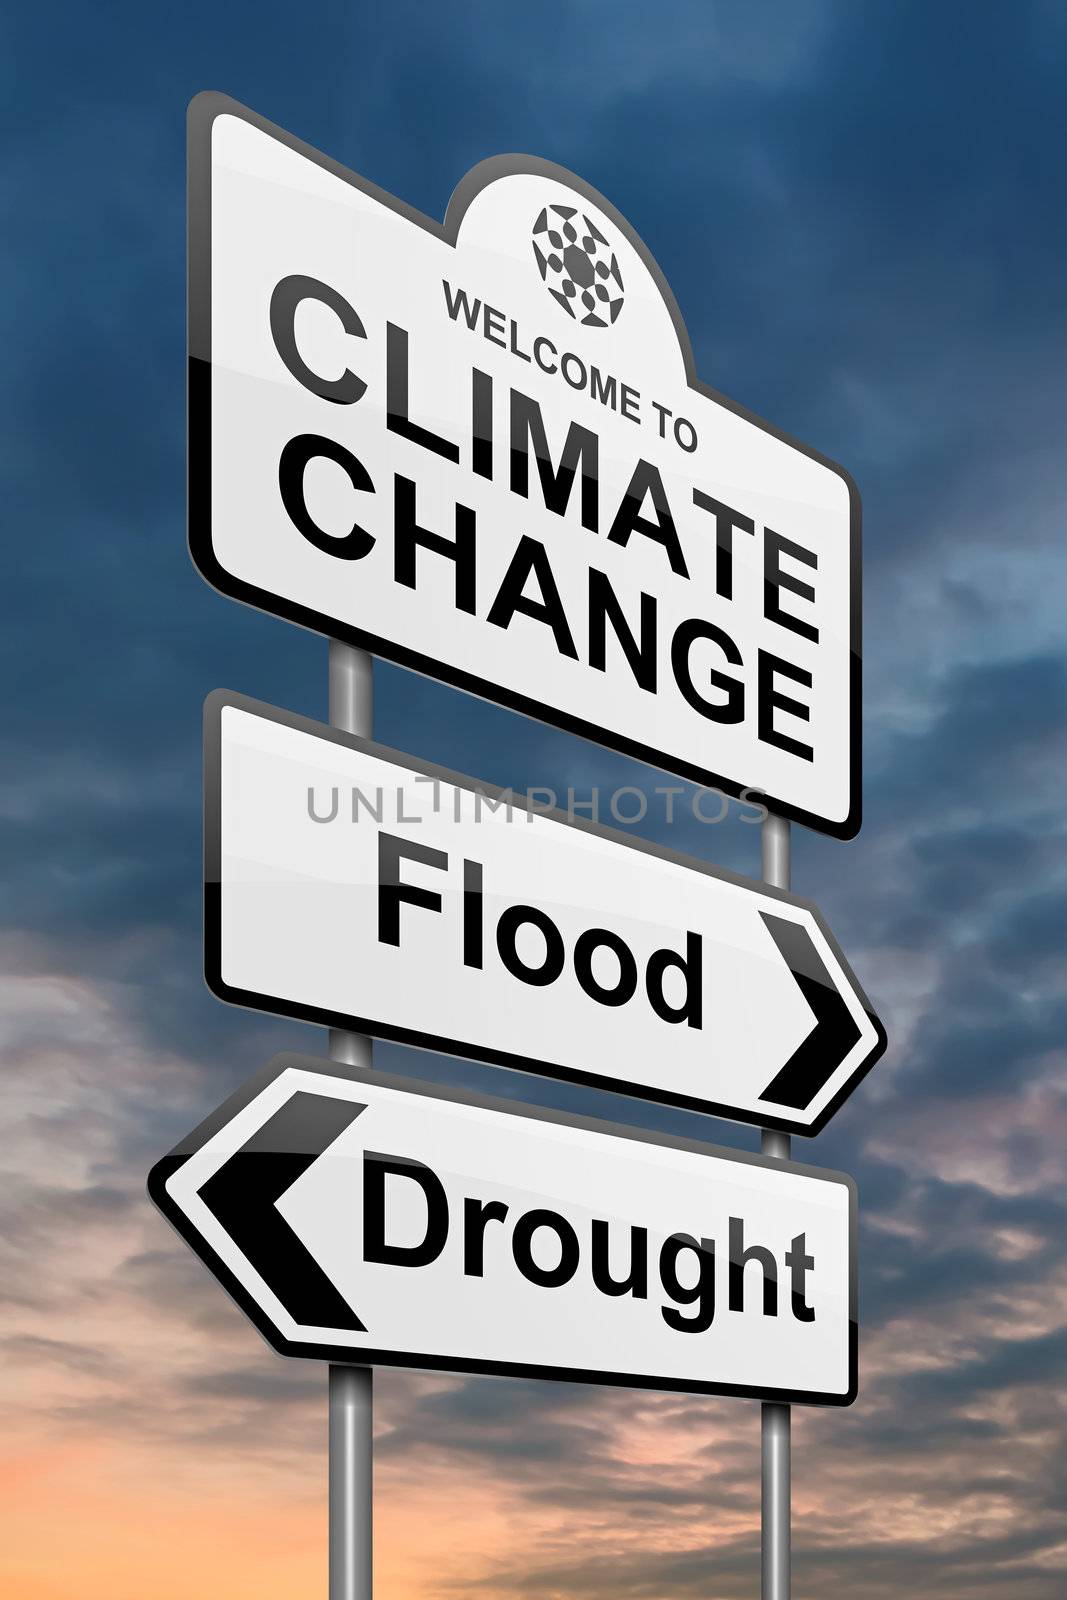 Illustration depicting a roadsign with a climate change concept. Sky background.